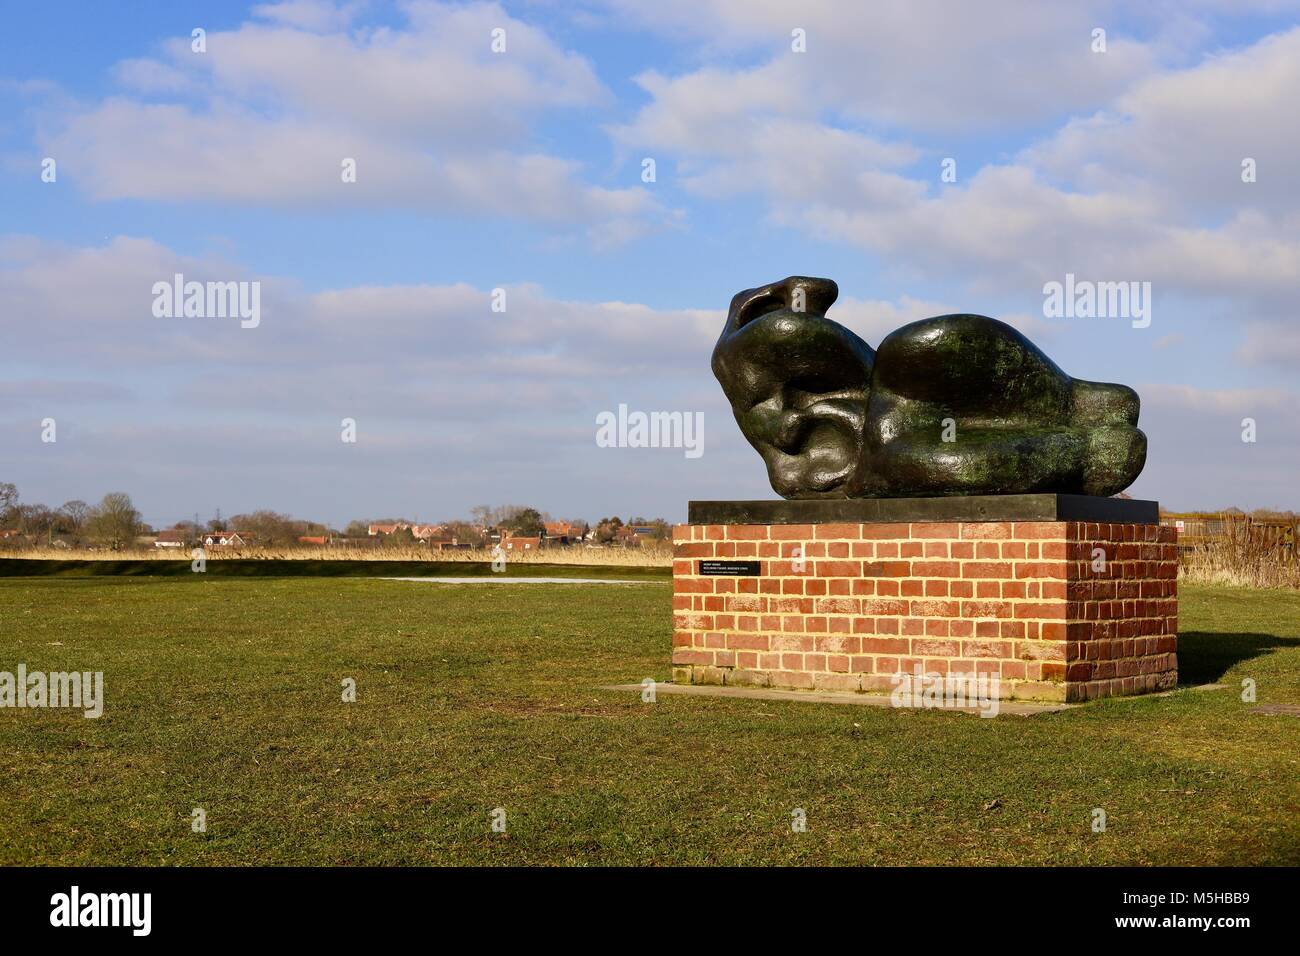 Sculpture: Reclining Figure: Bunched by Henry Moore 1969. Outside the concert hall at Snape Maltings, Suffolk. Stock Photo